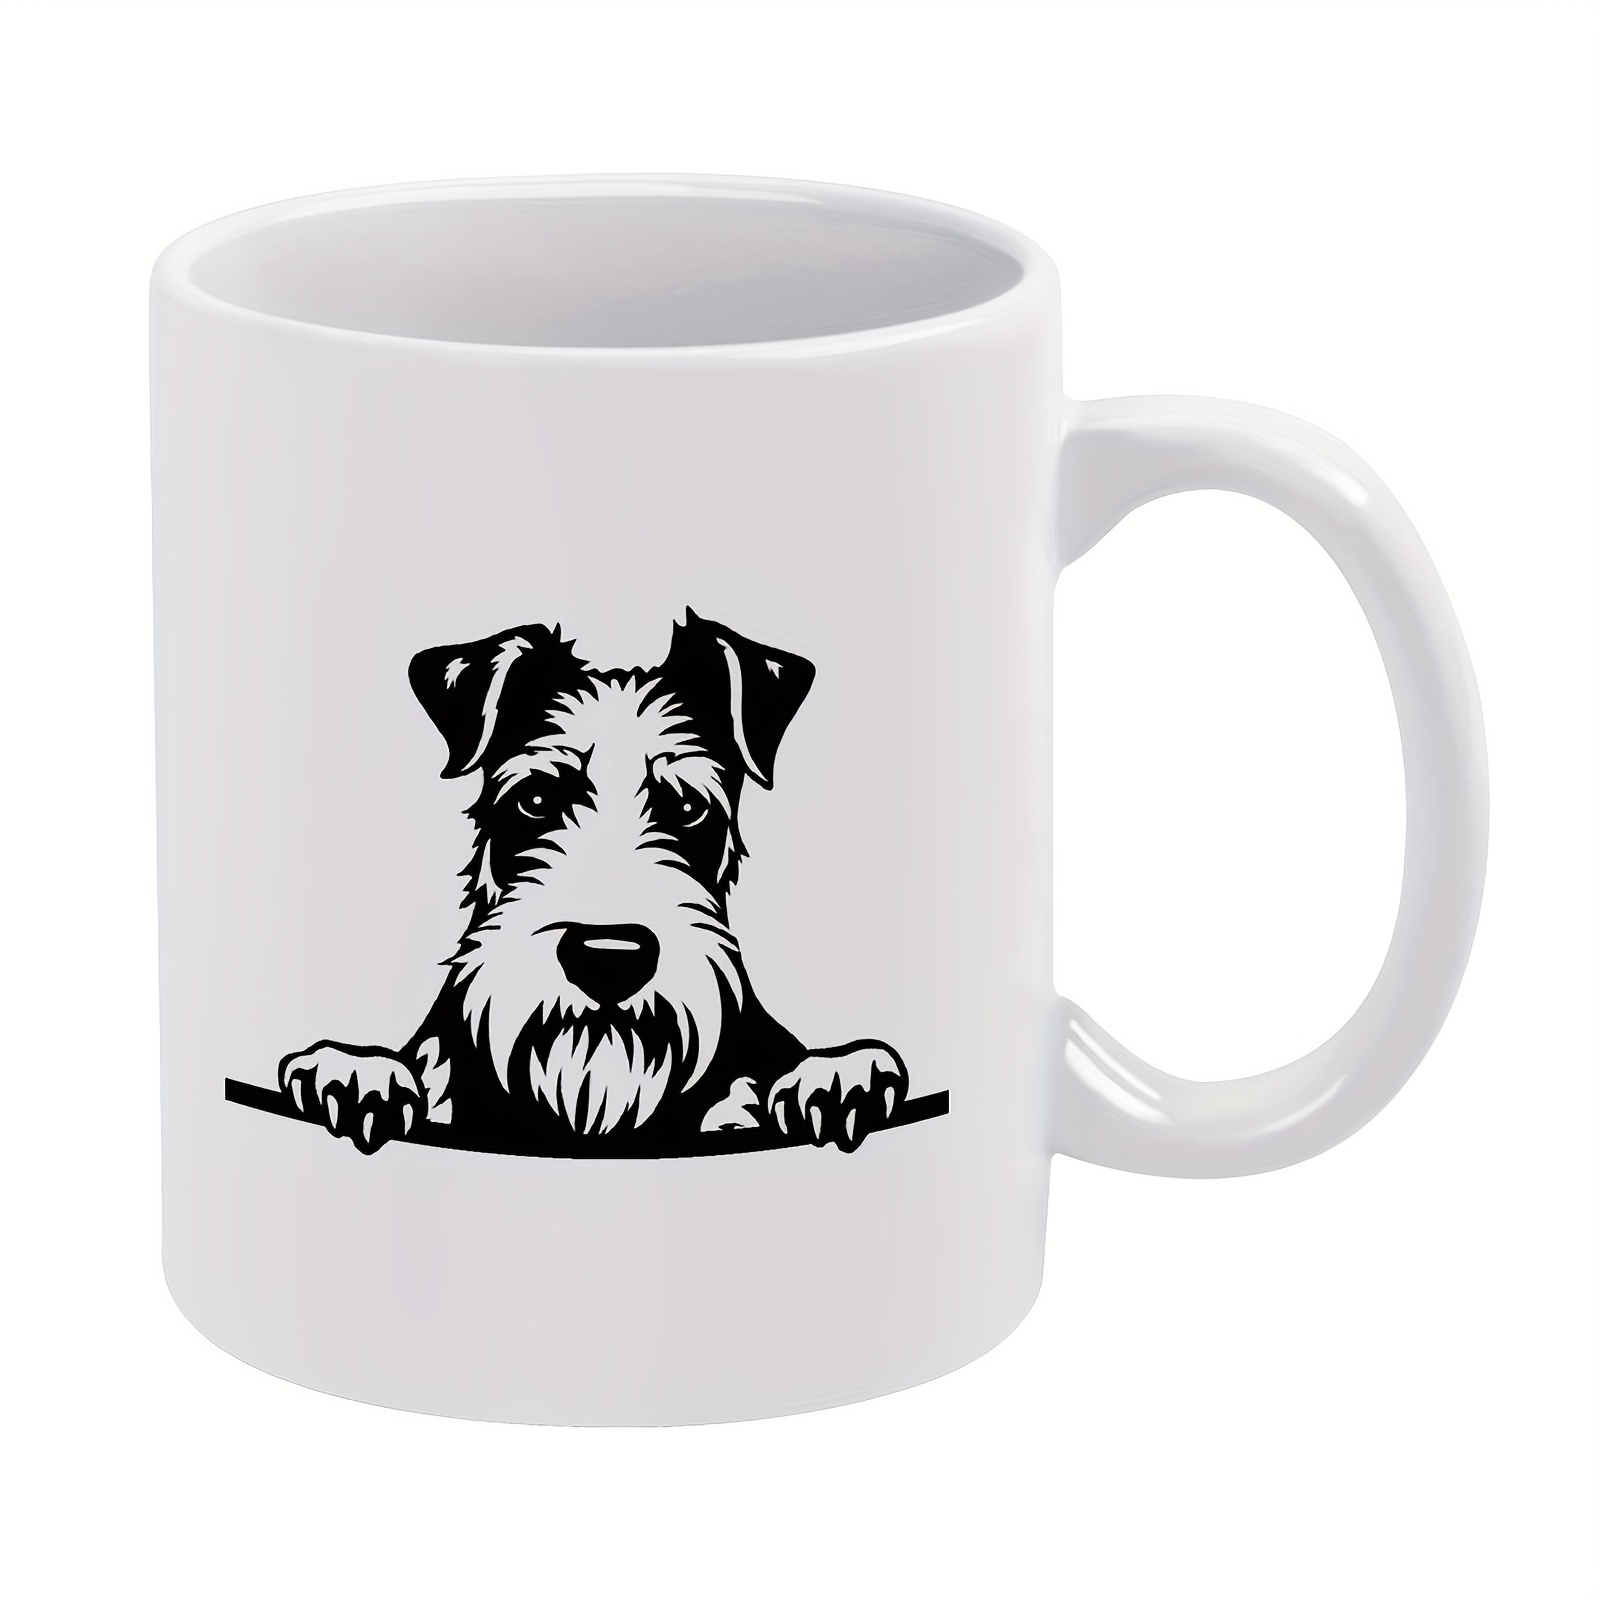 

1pc, 11oz Coffee Mug, Wirefox Terrier, Perfect Gift For Friends, Sisters, Colleagues, And Family - Ideal For Coffee Lovers - Ceramic Cup For Birthdays, Parties, And Holidays